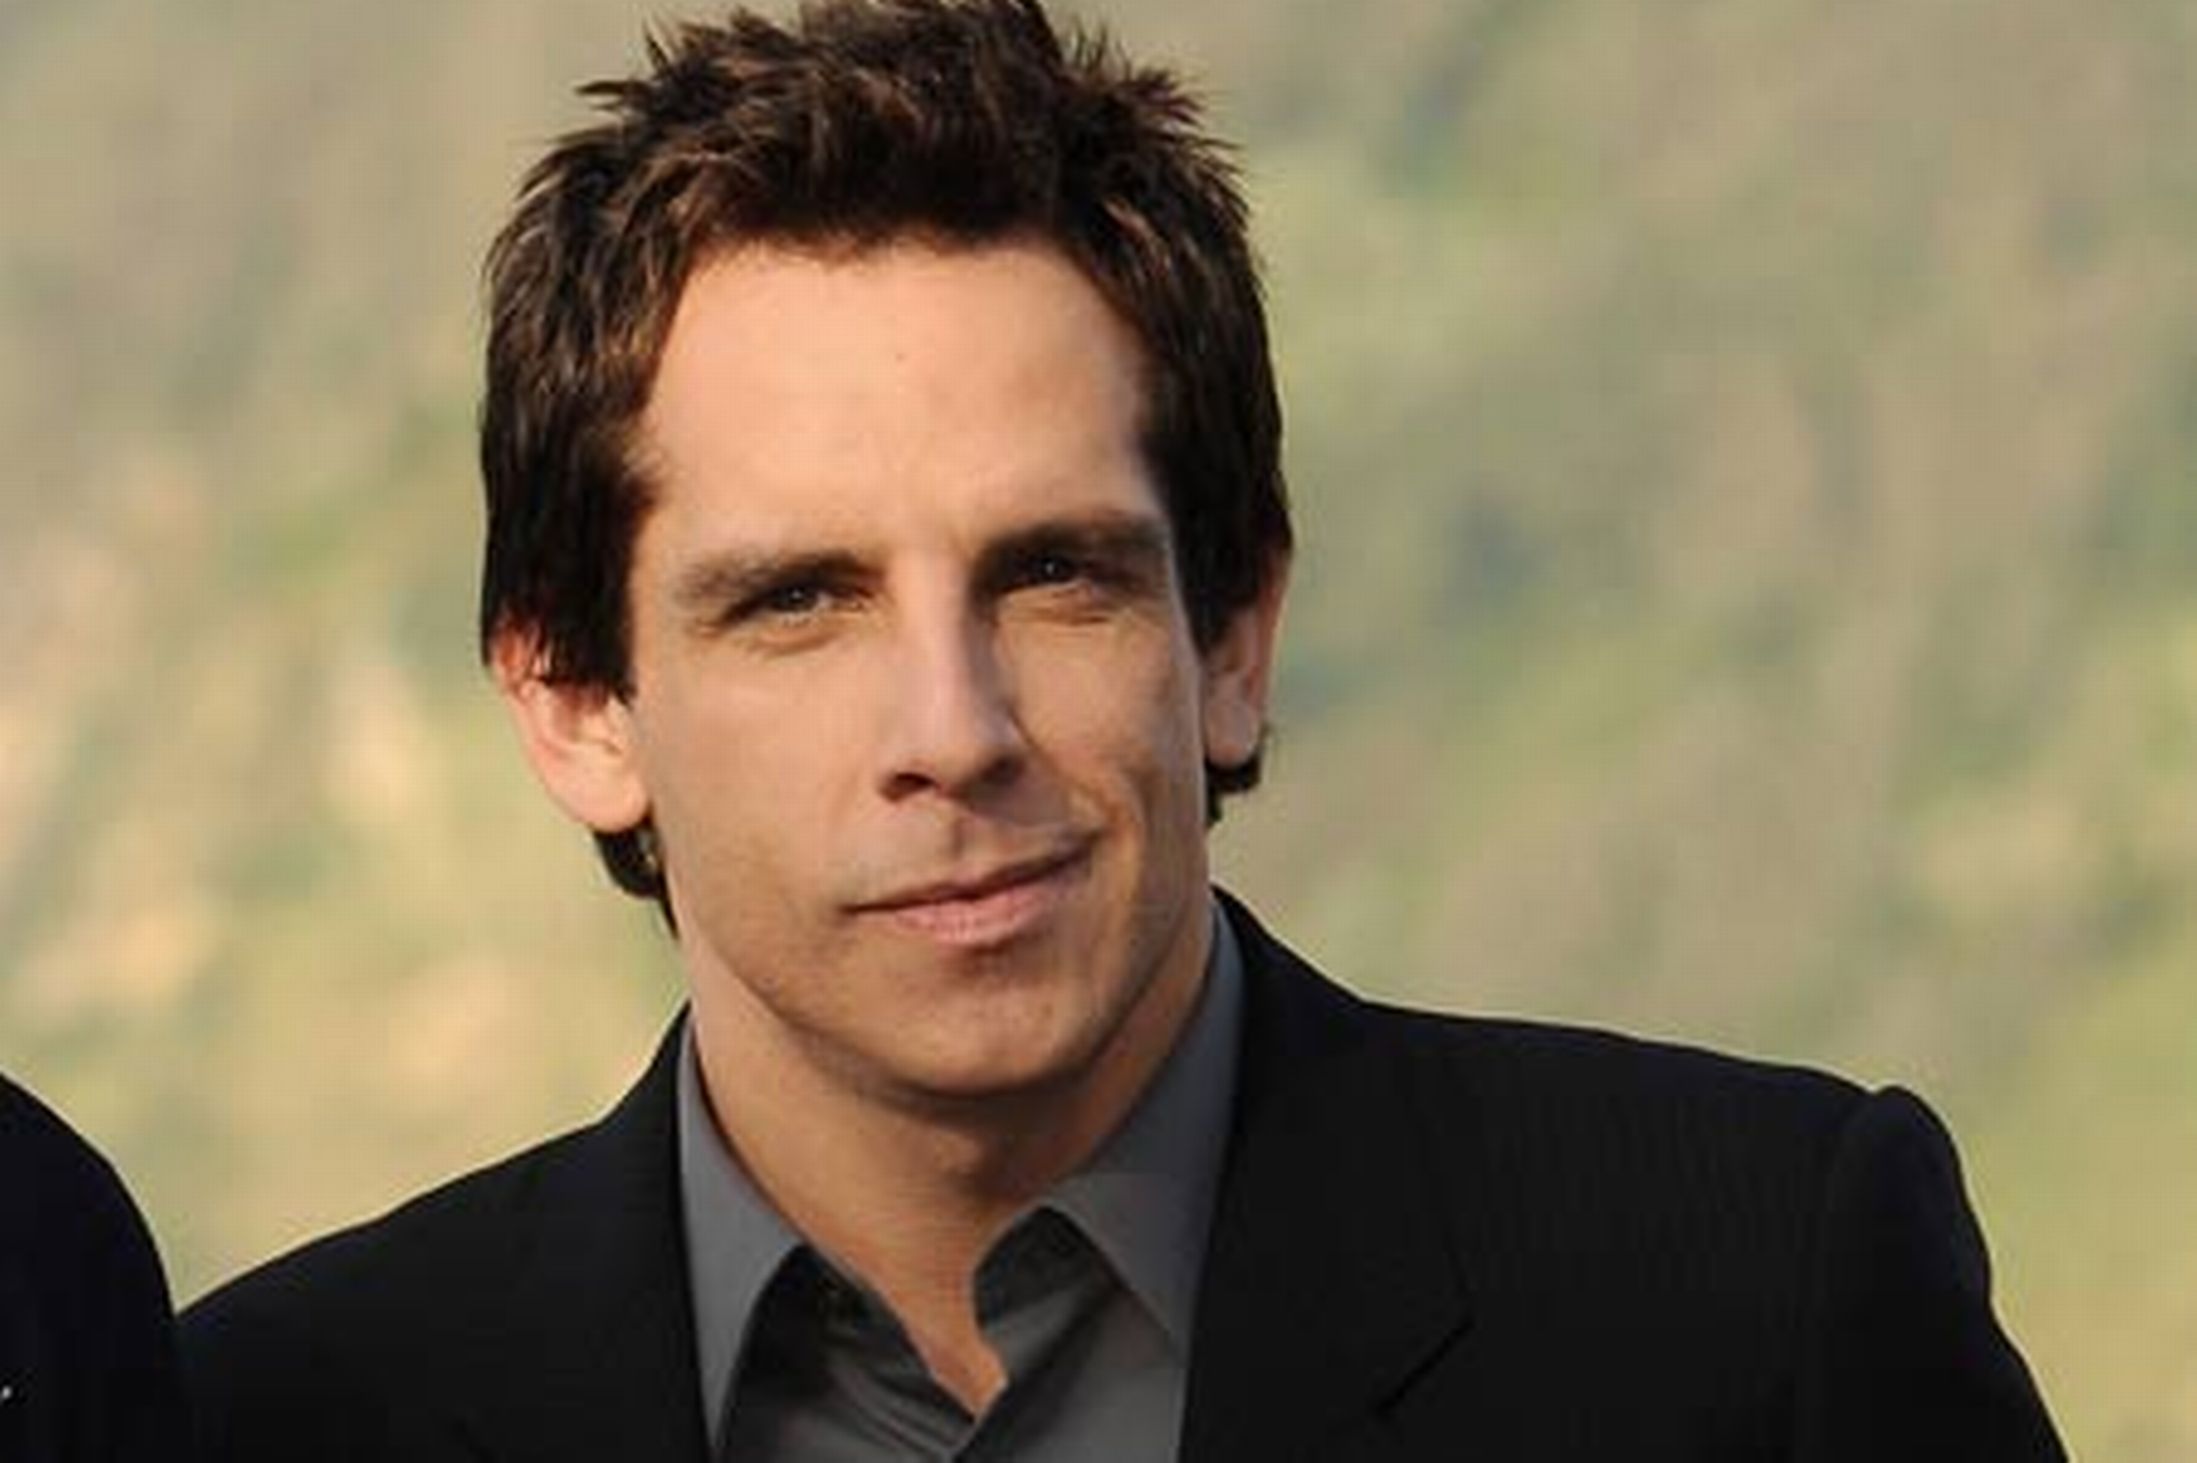 BEN STILLER was in a high school punk band ��� Howl and Echoes